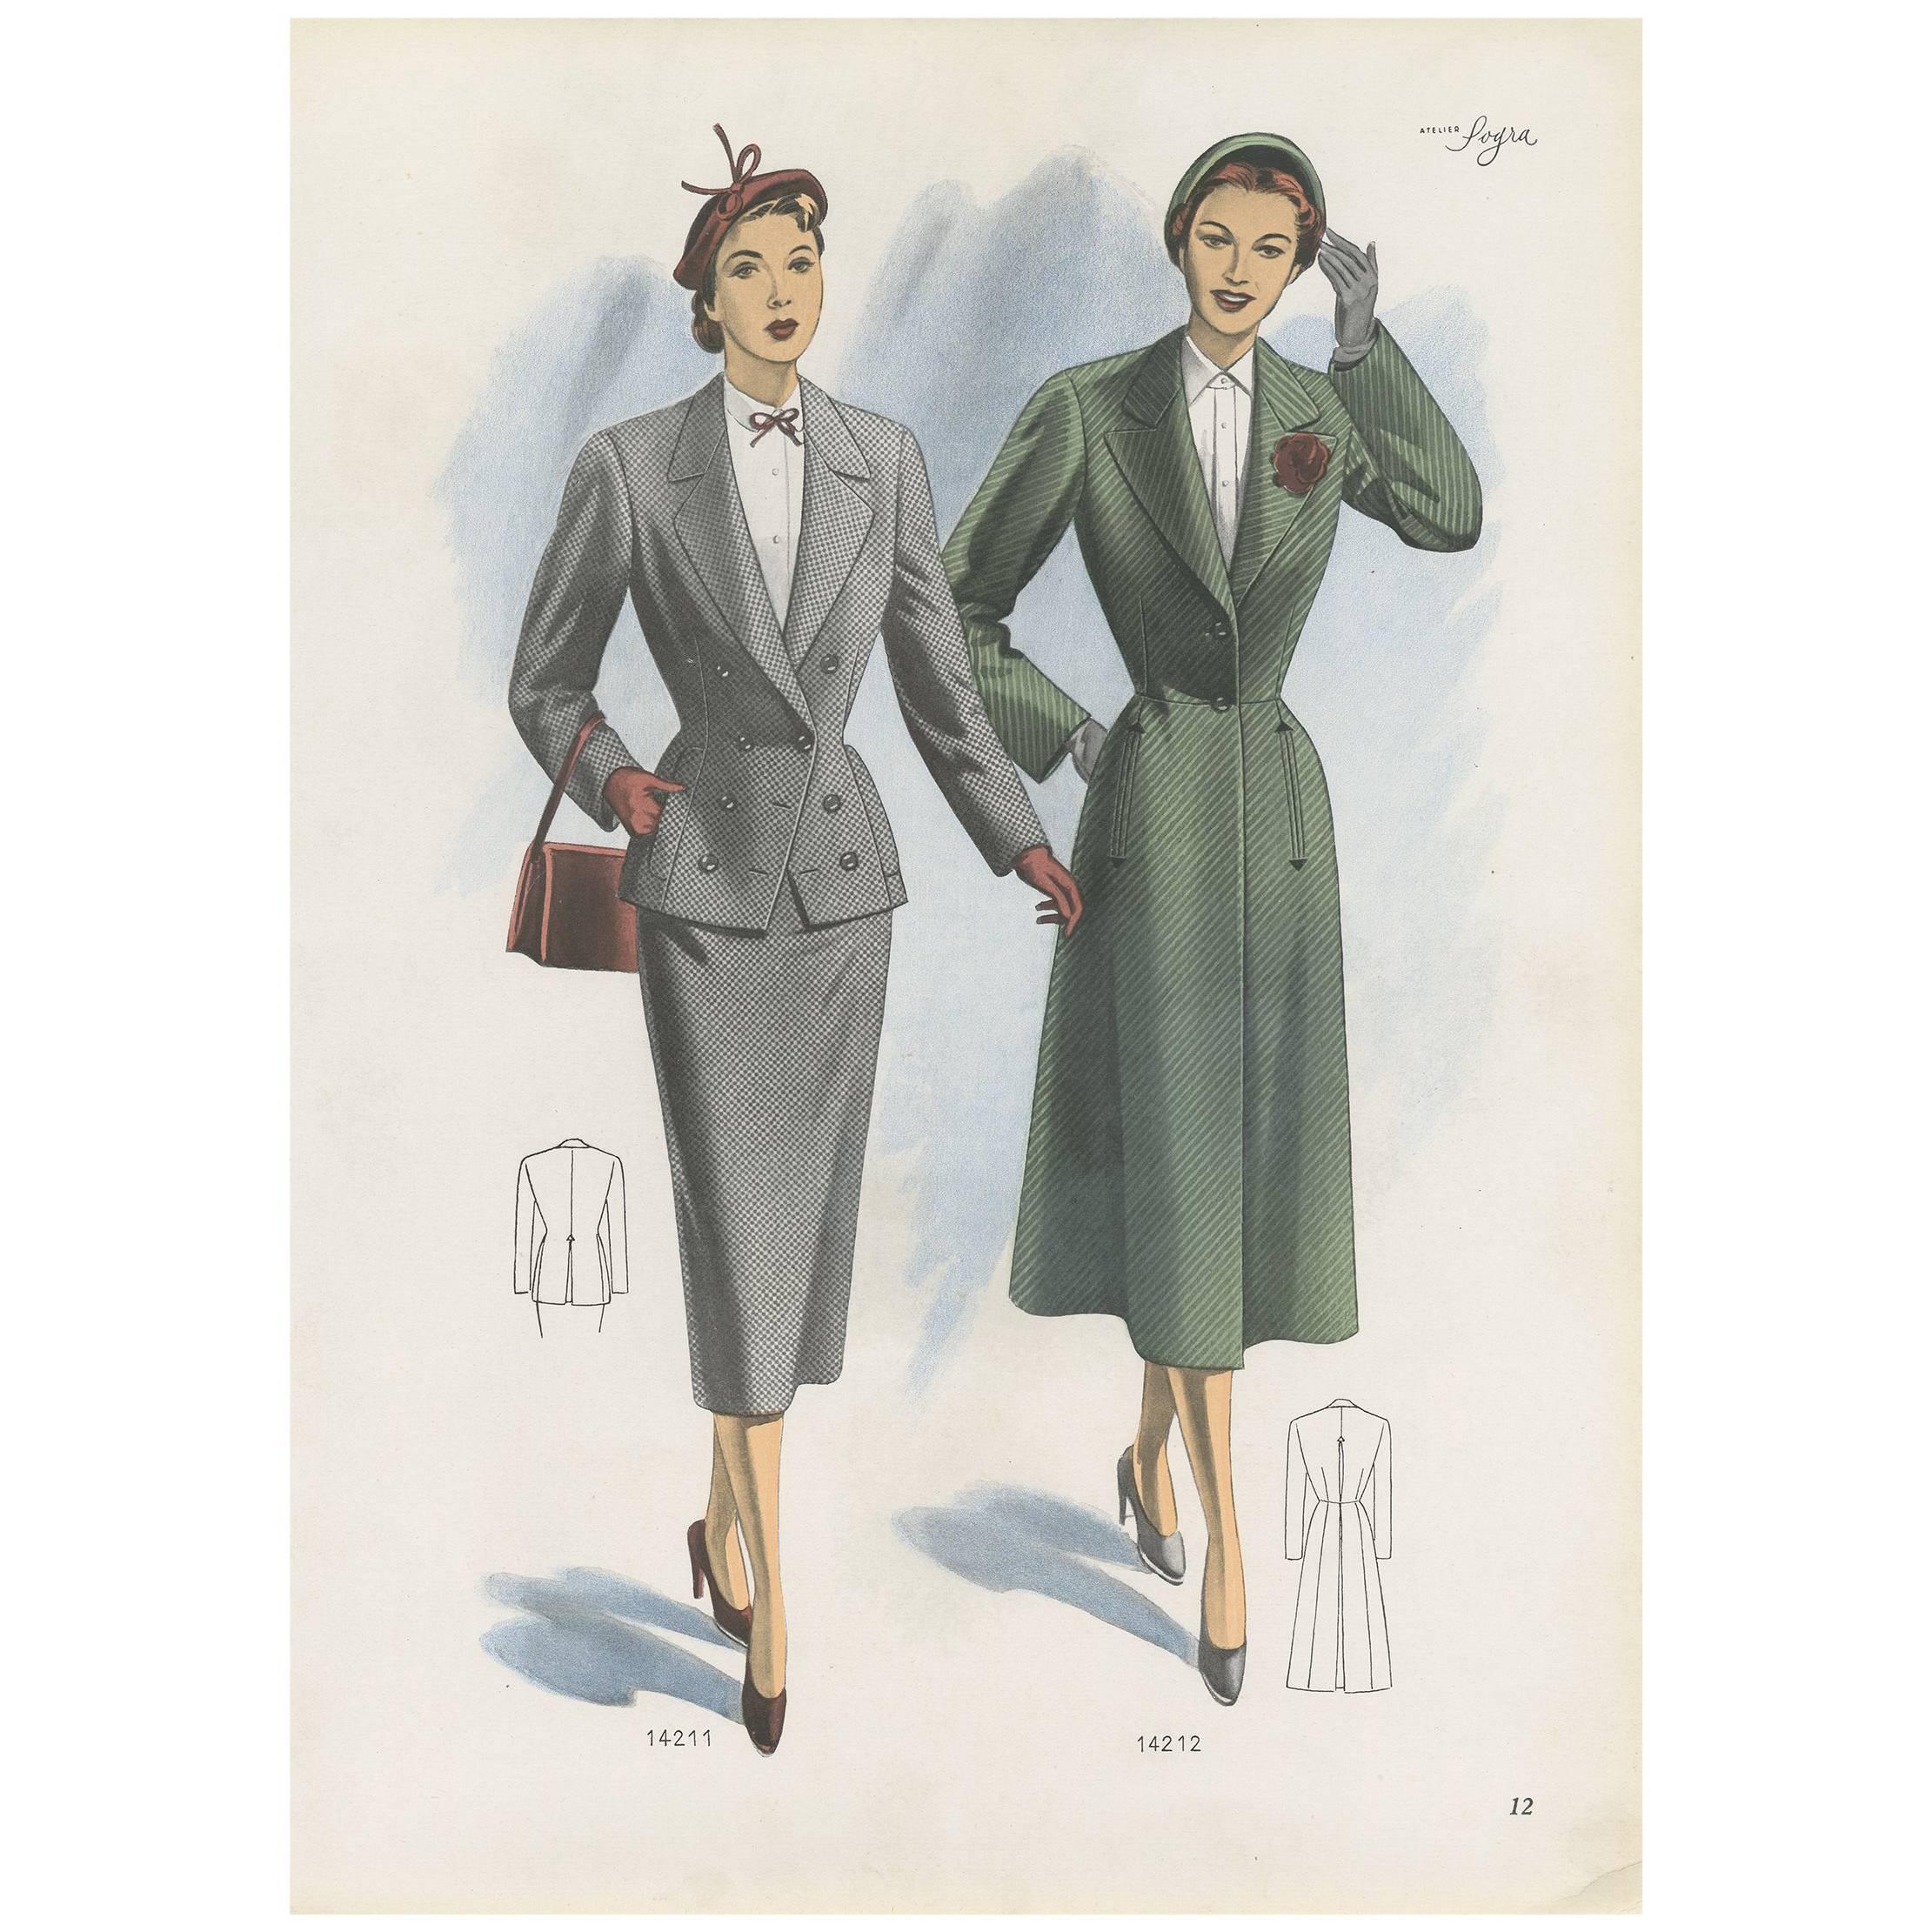 Vintage Fashion Print 'Pl. 14211' Published in Ladies Styles, 1951